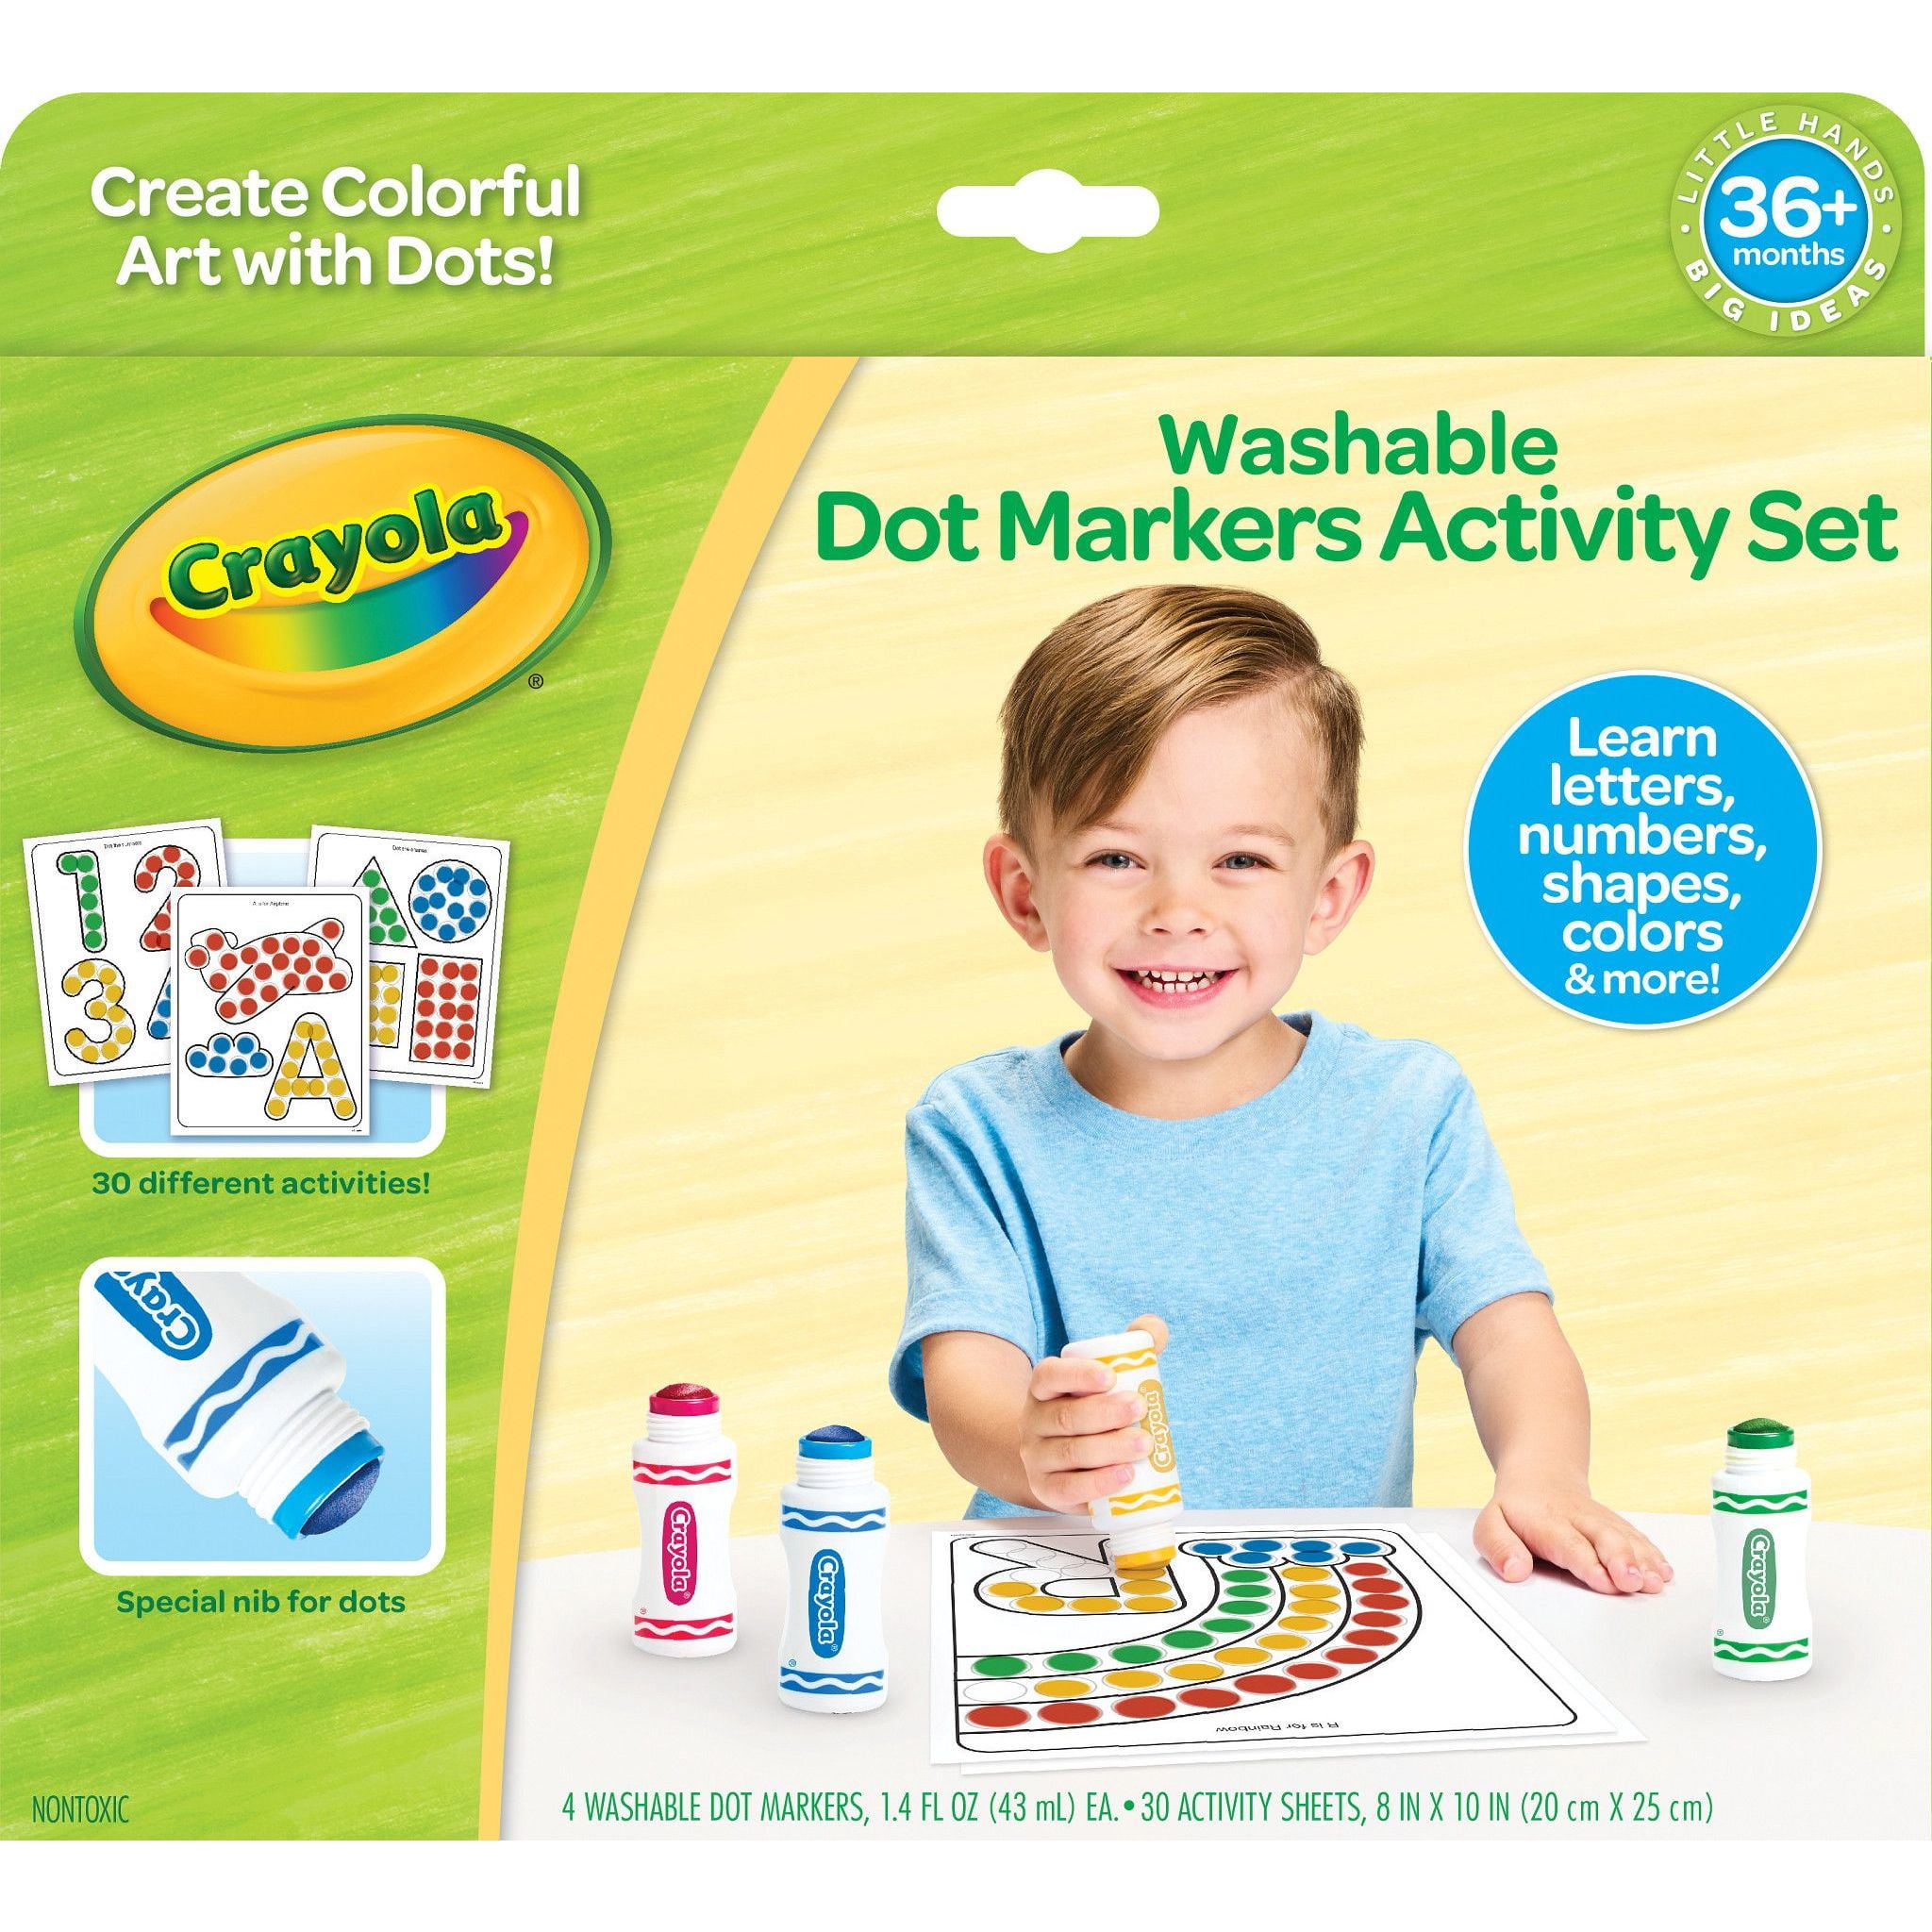 Crayola Young Kids Art Supplies Bundle, Art Set for Girls and Boys, Gifts  for Toddlers, 36 Months [ Exclusive]